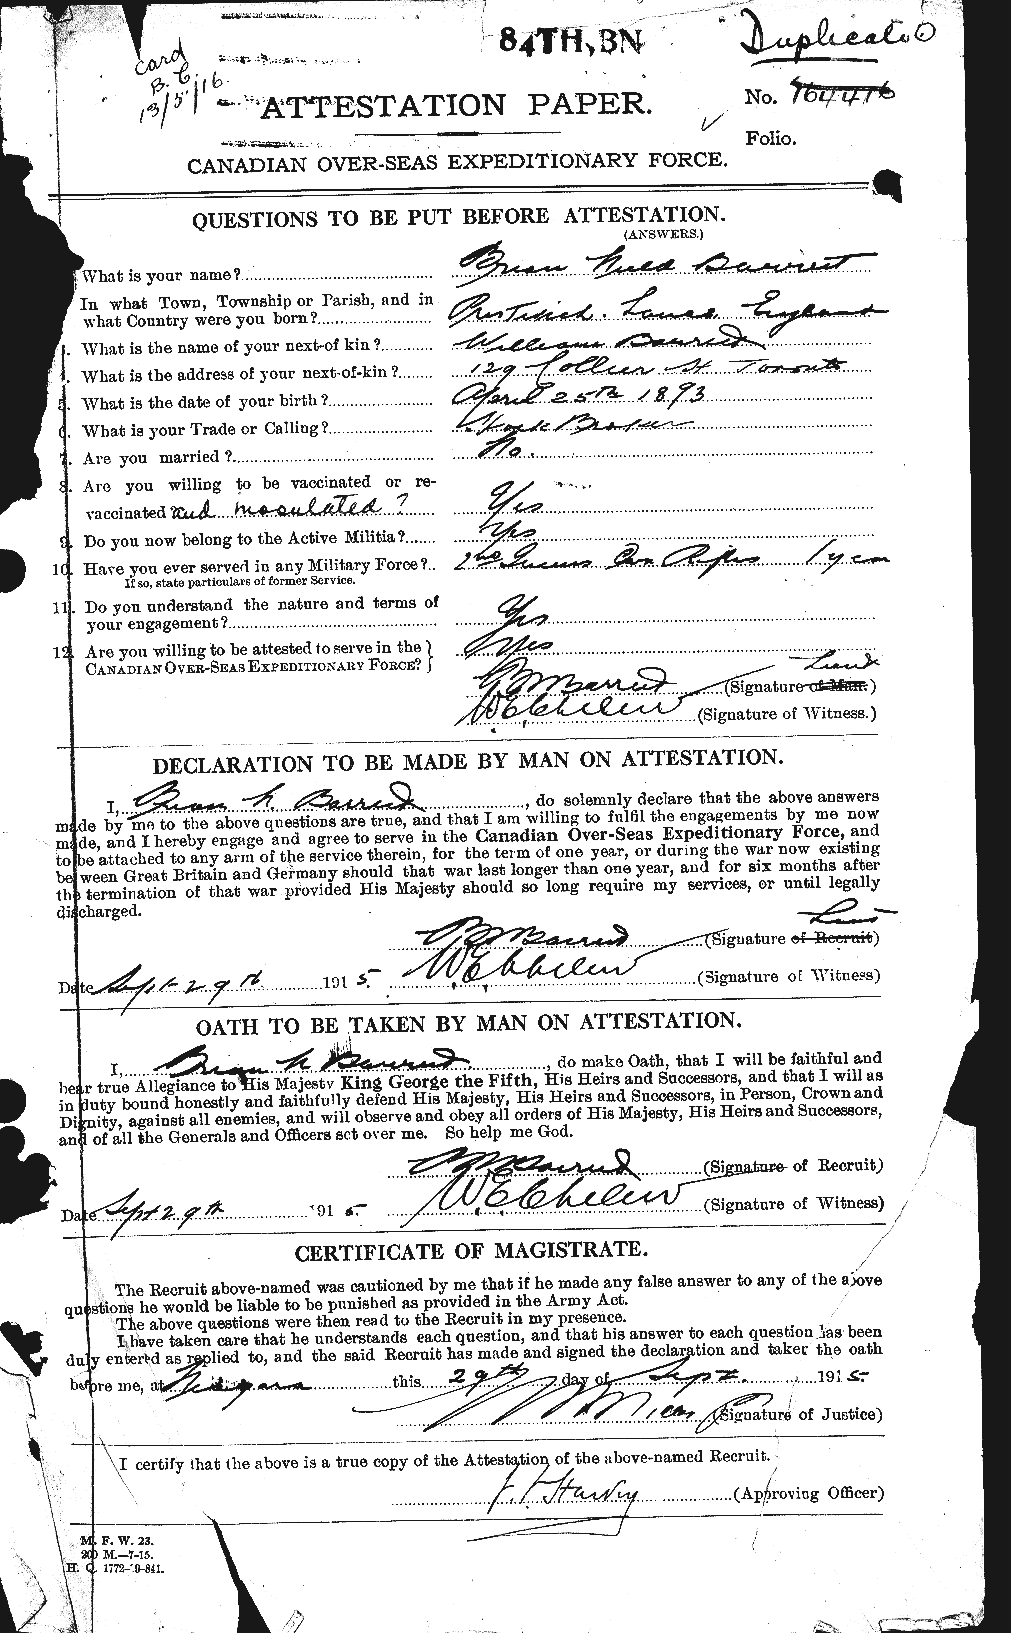 Personnel Records of the First World War - CEF 222236a